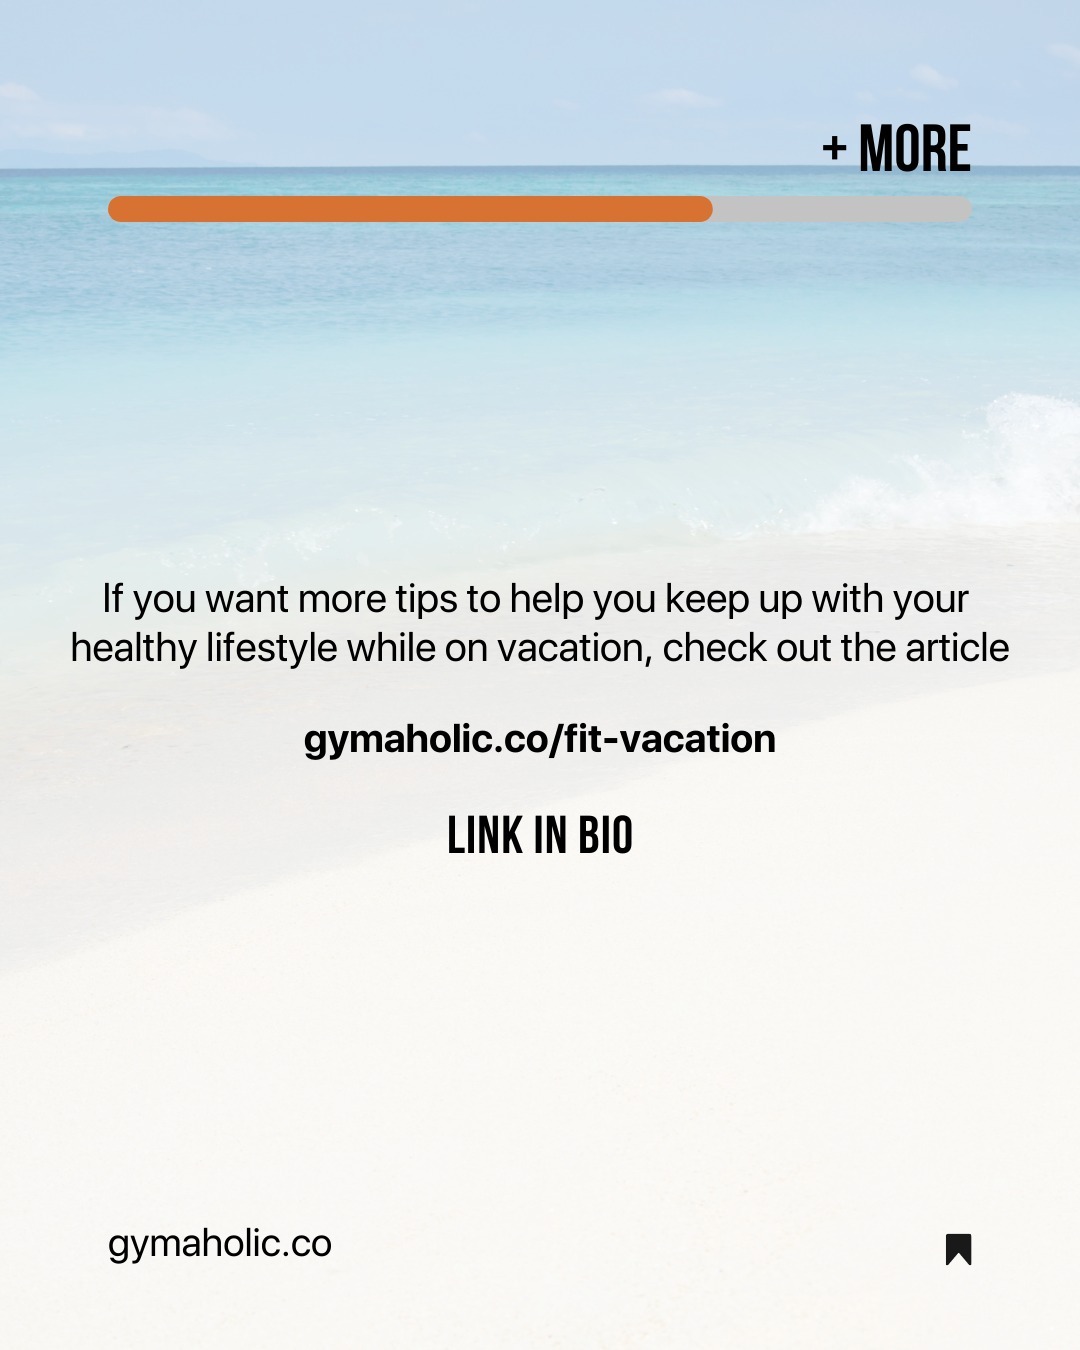 Can you maintain a healthy lifestyle when you’re on vacation?